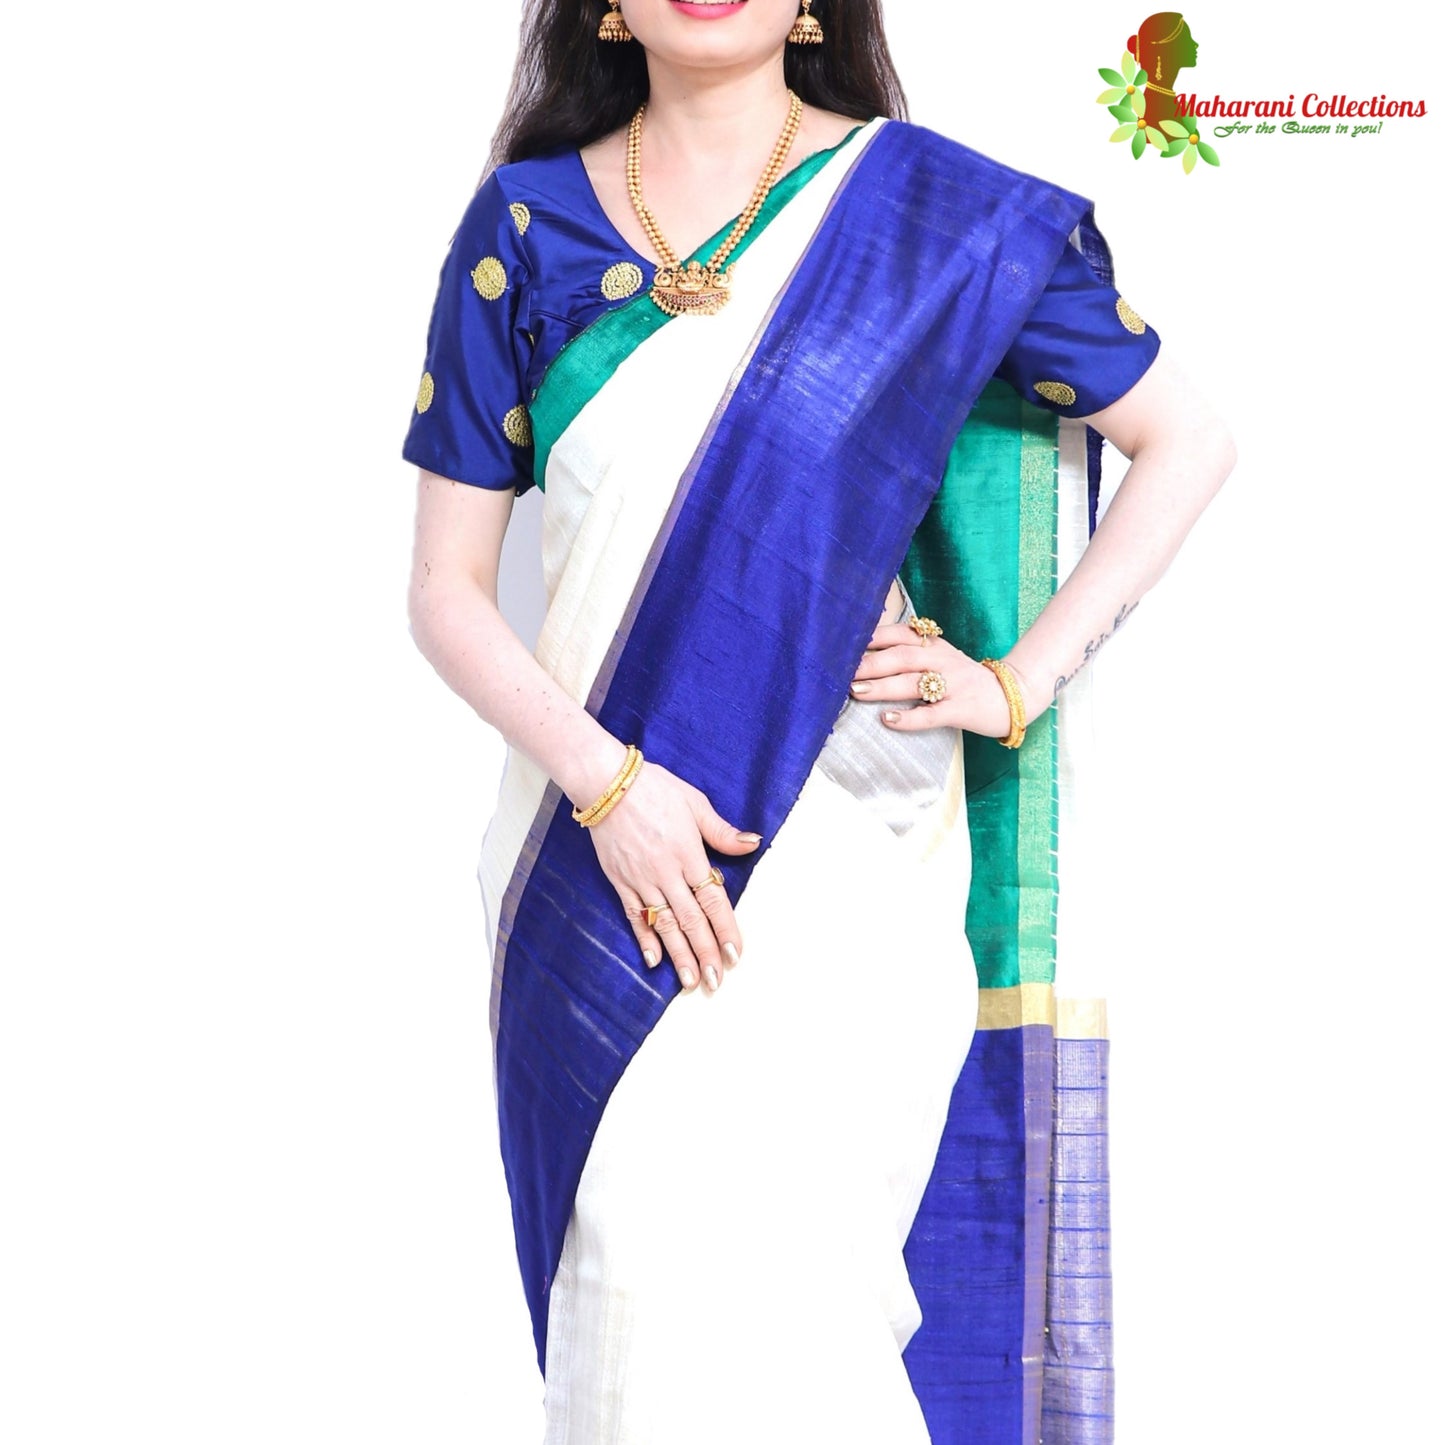 Pure Handloom Tussar Silk Saree - White, Green and Blue with Golden Zari and Temple Border